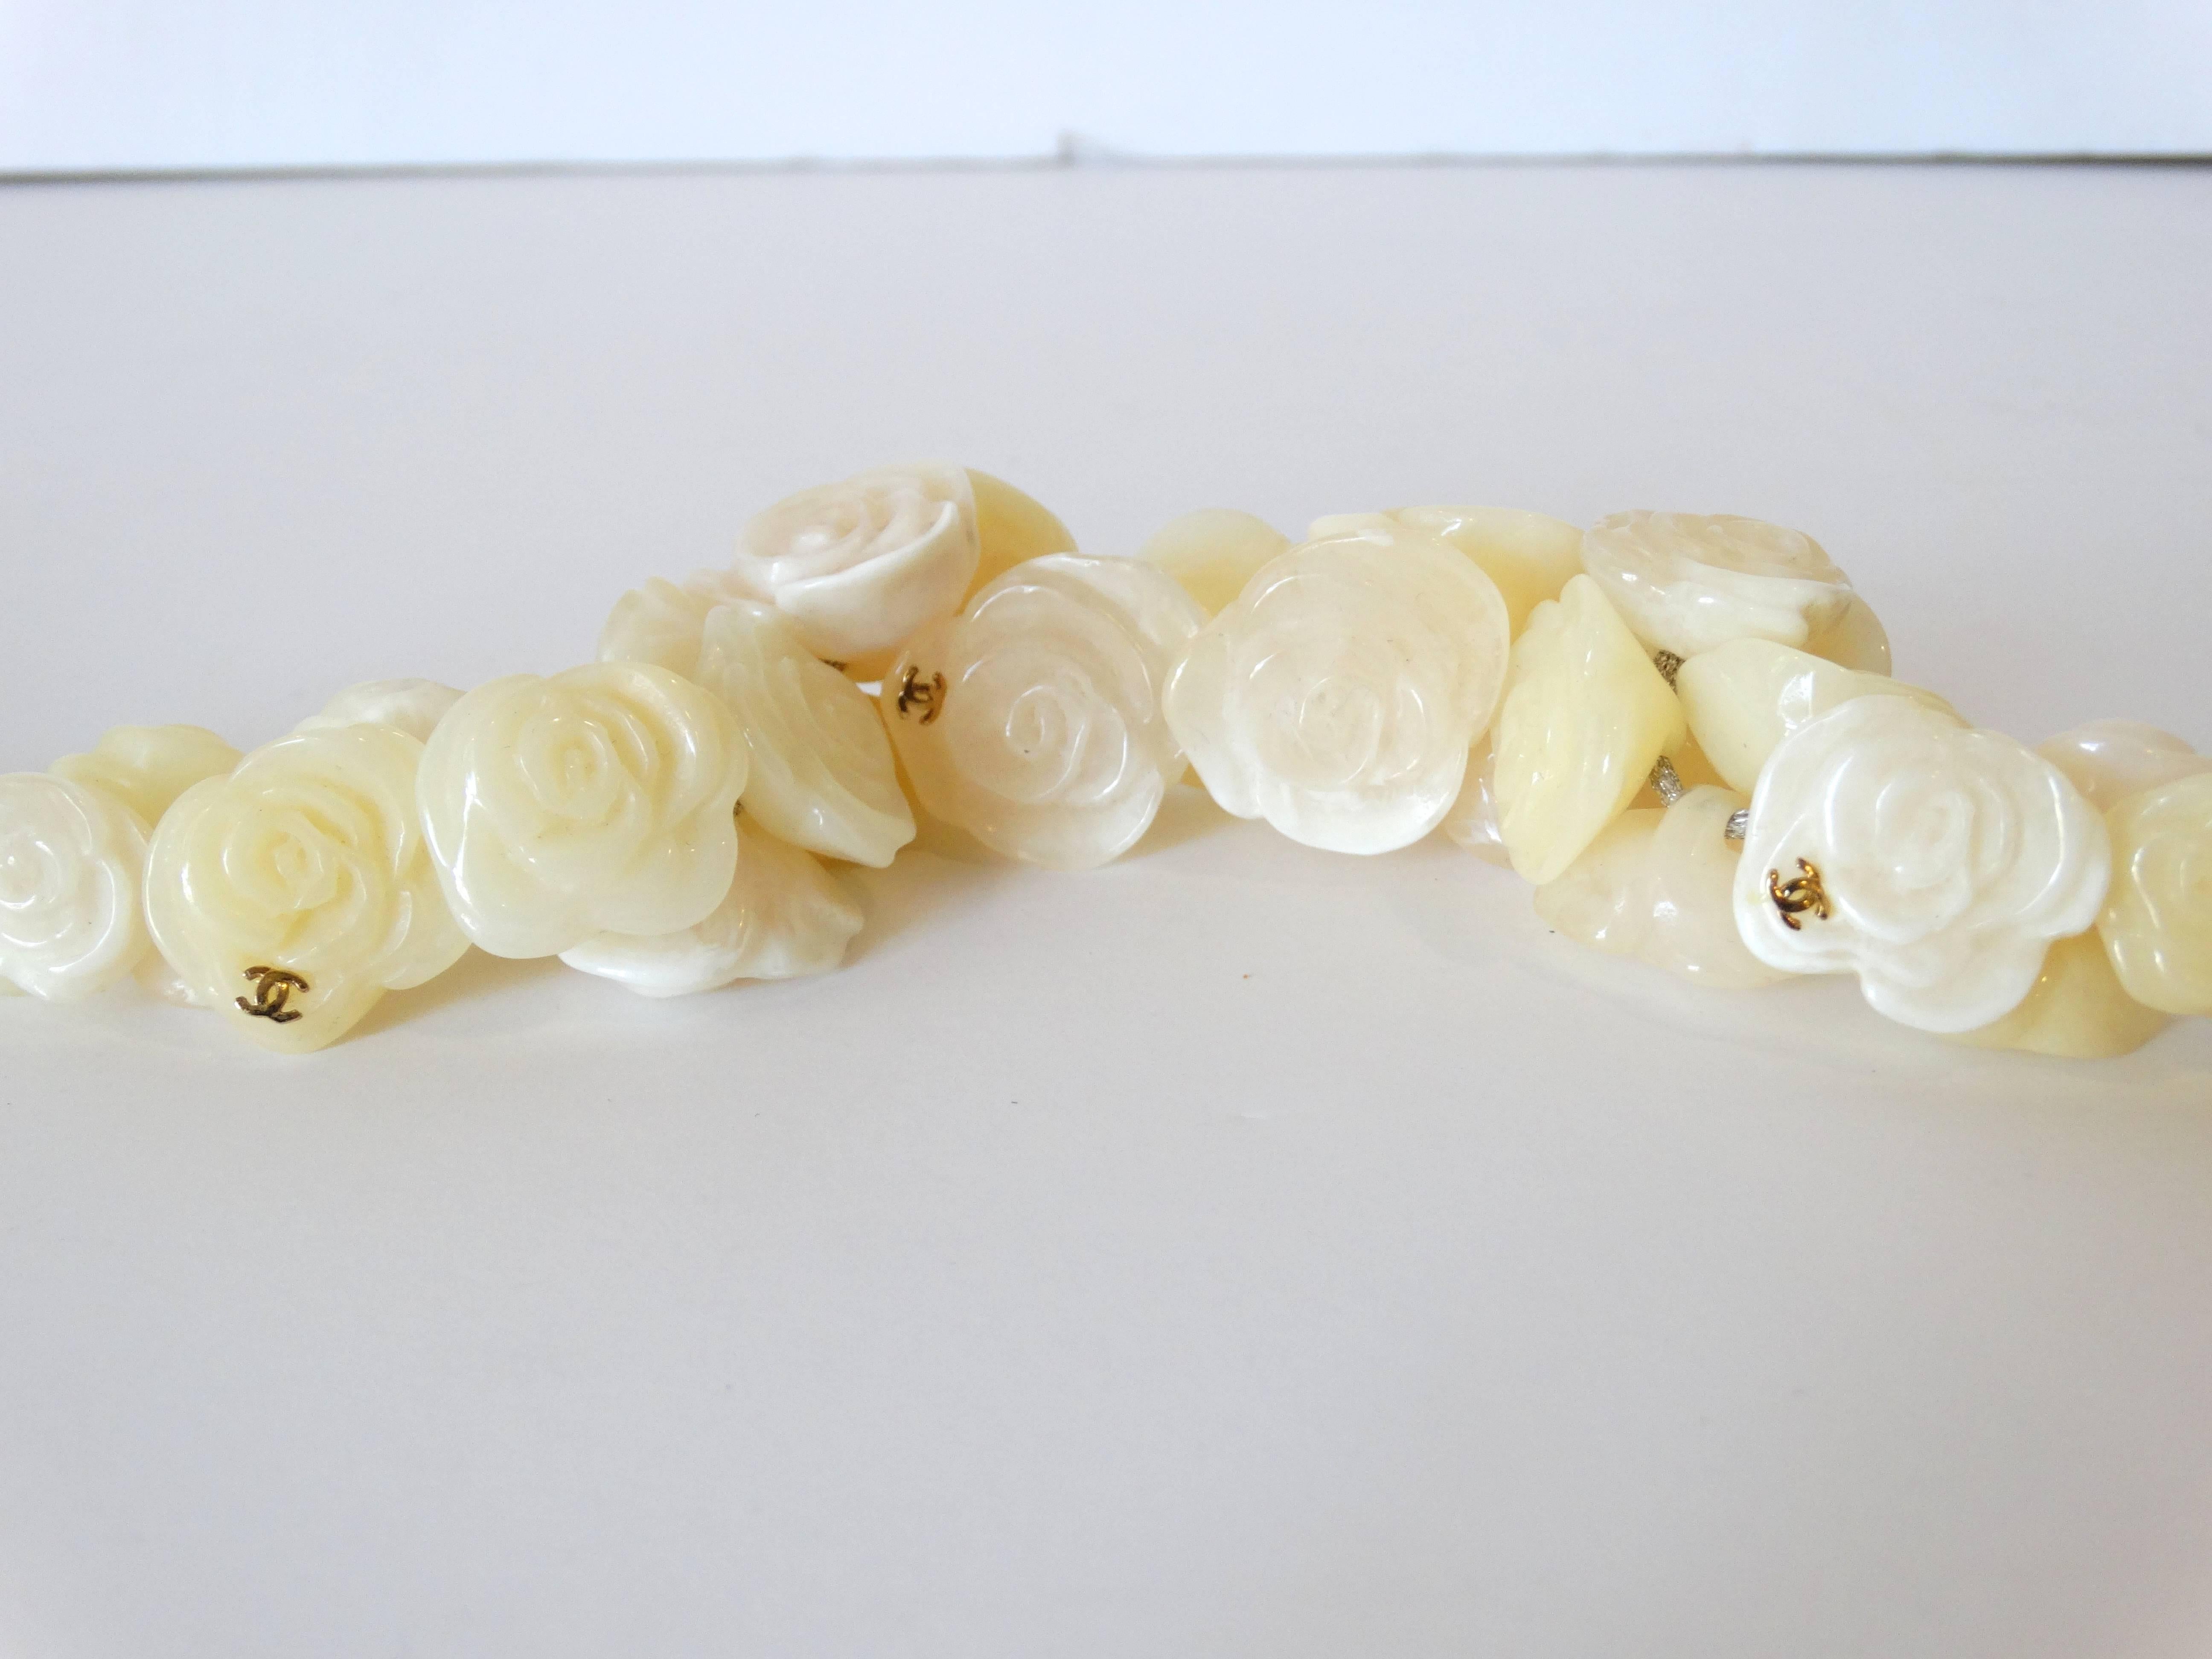 Gold-tone Chanel Camellia Floral choker necklace featuring ivory resin embellishments, metallic ribbon and self tie closure. Charm on one side of the ribbon is missing. Signed on the back of the petal charm. From the Spring 2002